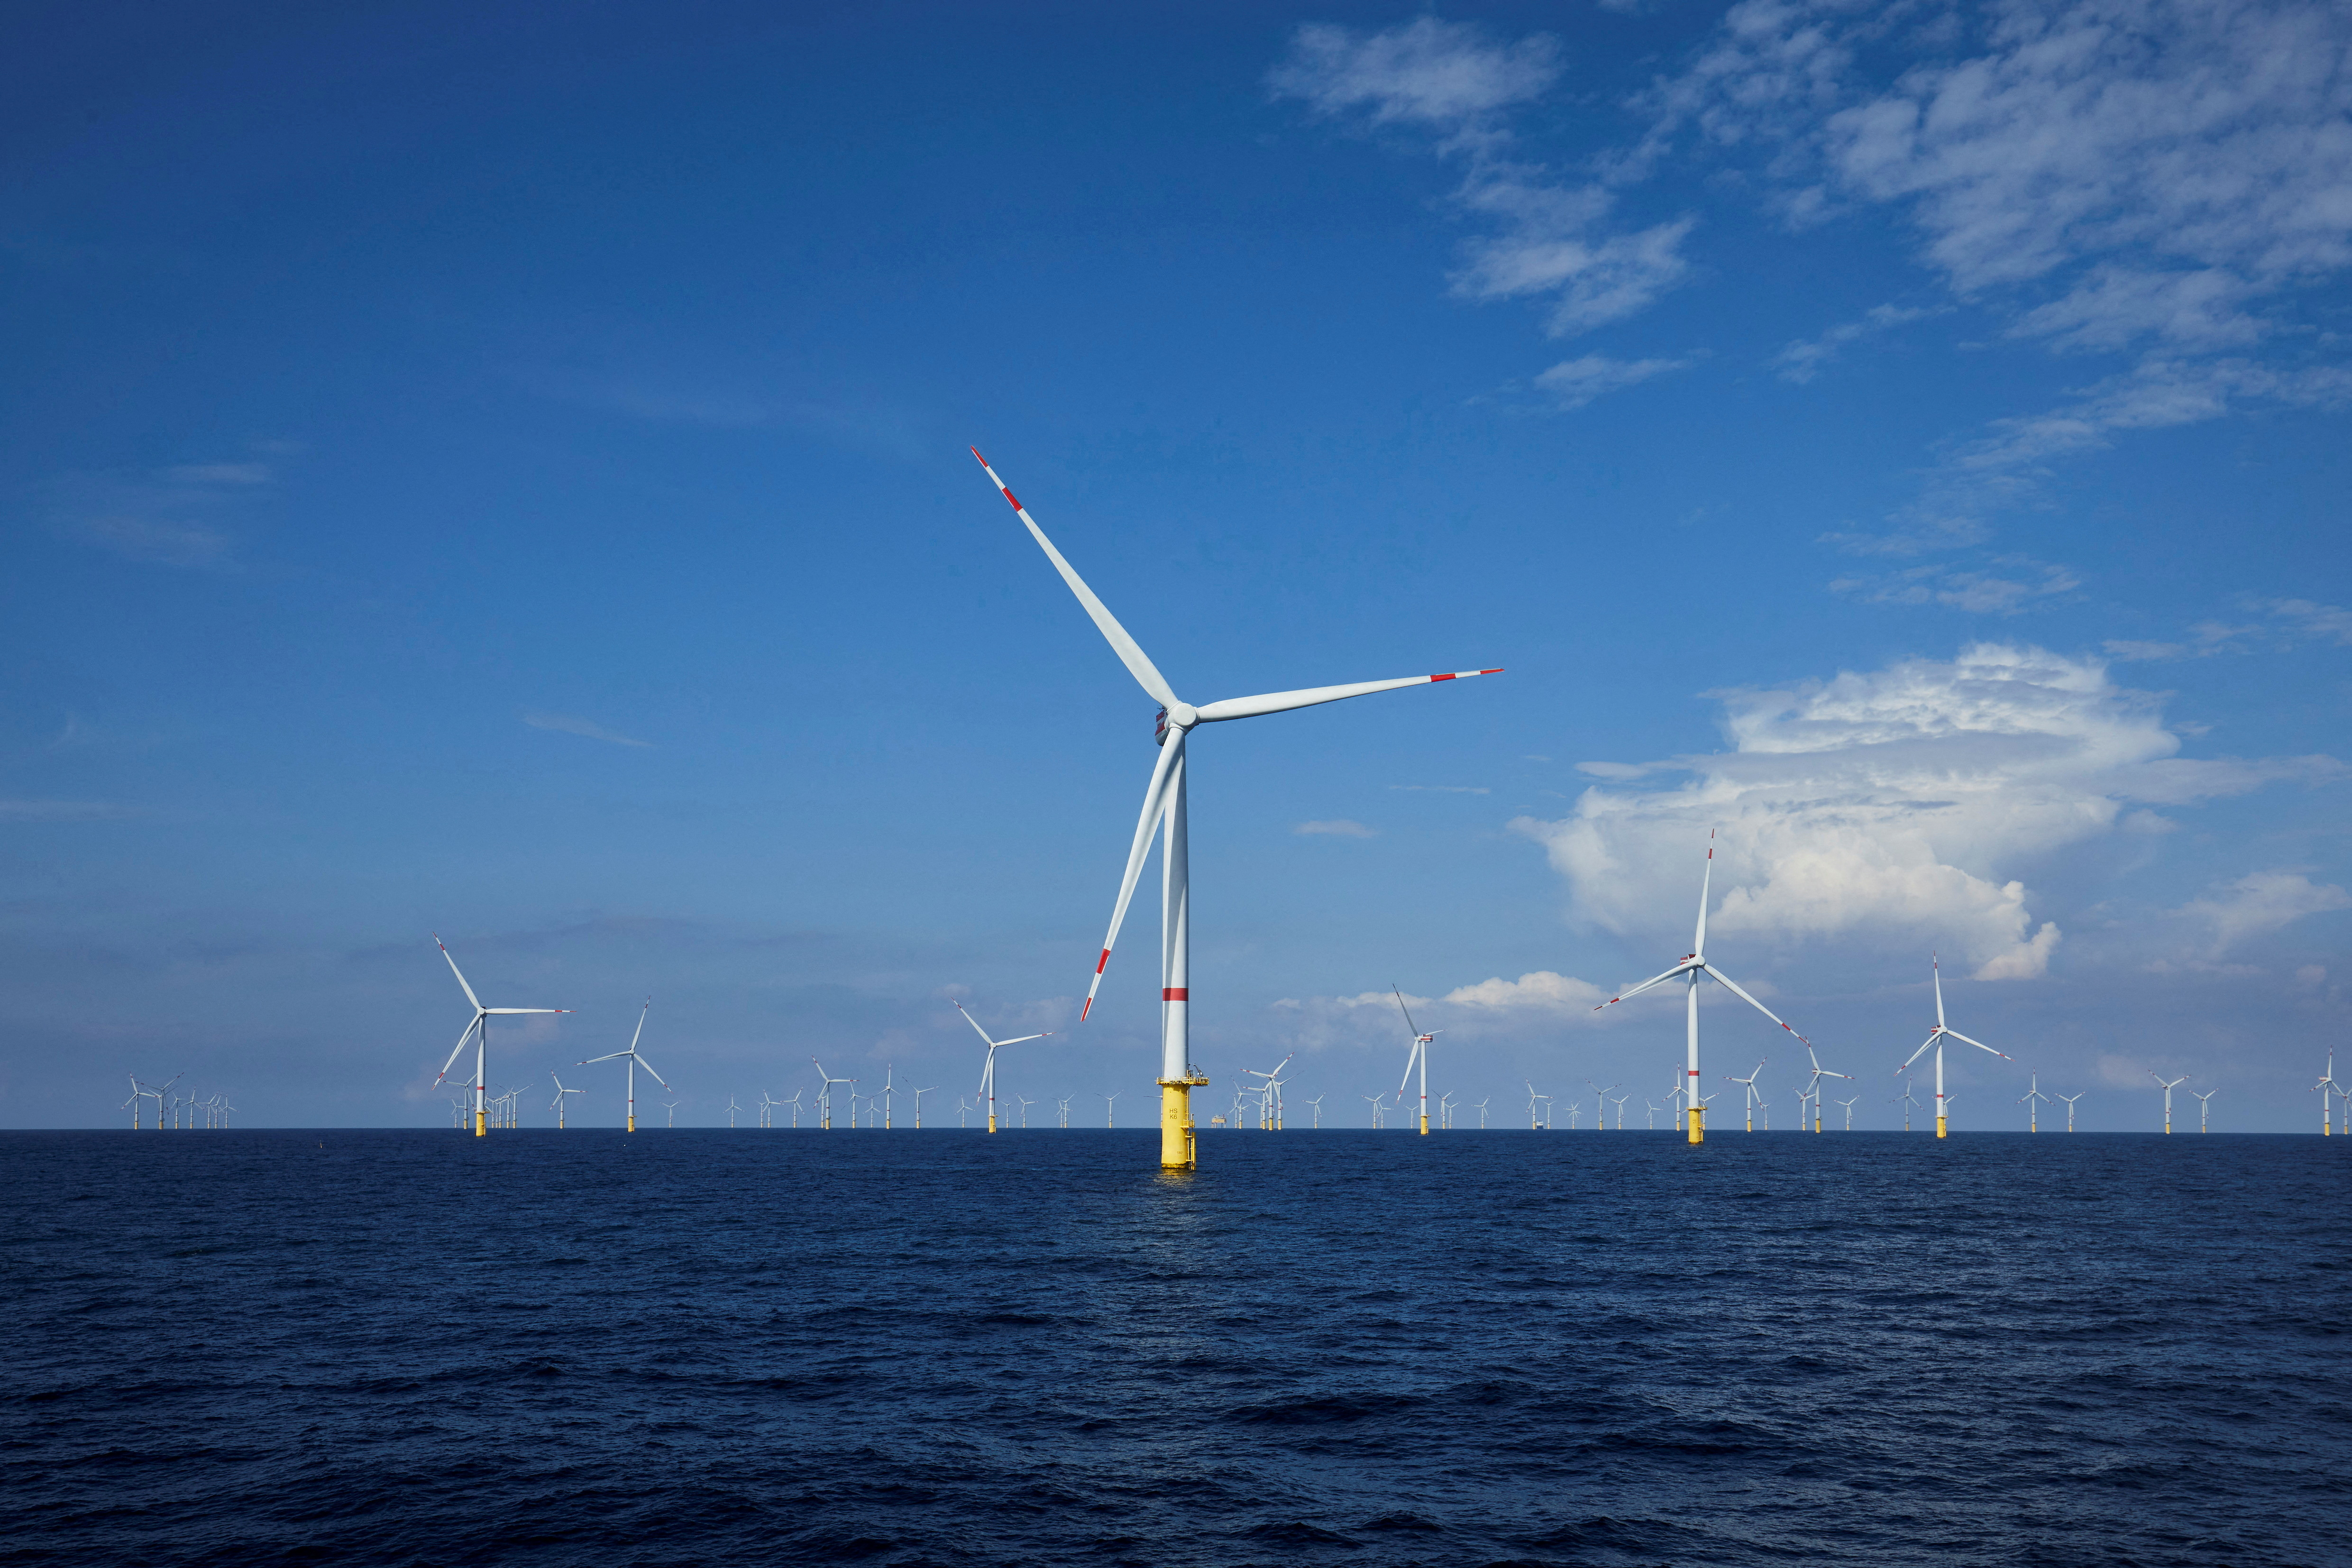 An offshore wind project in the German North Sea is seen in this handout image